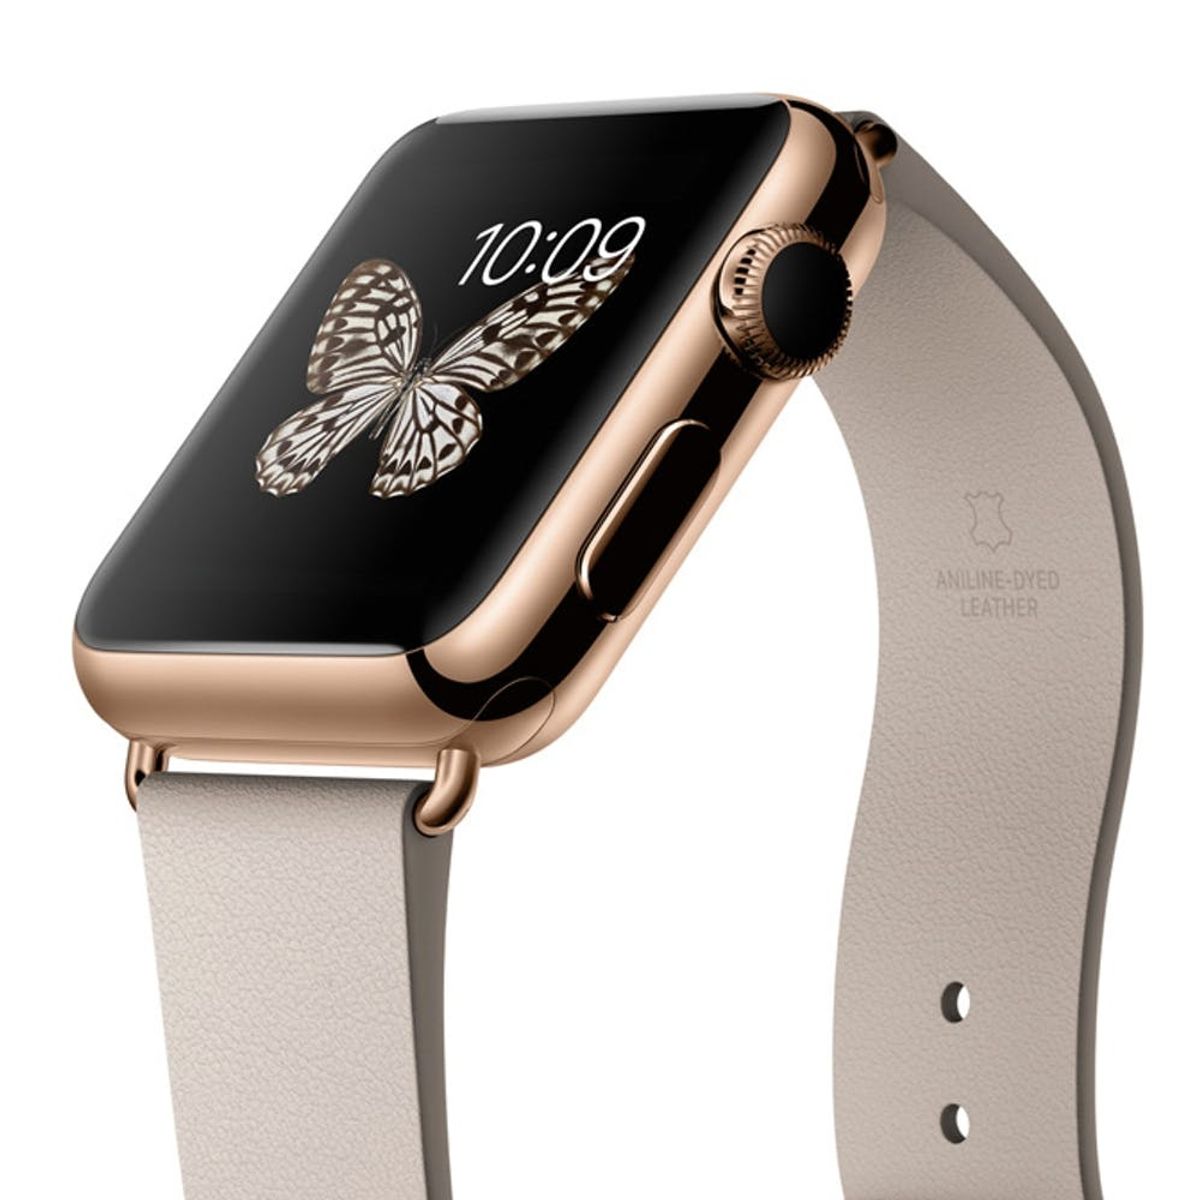 Apple Watch Rumor Update: The Big Feature the Wearable Will Be Missing